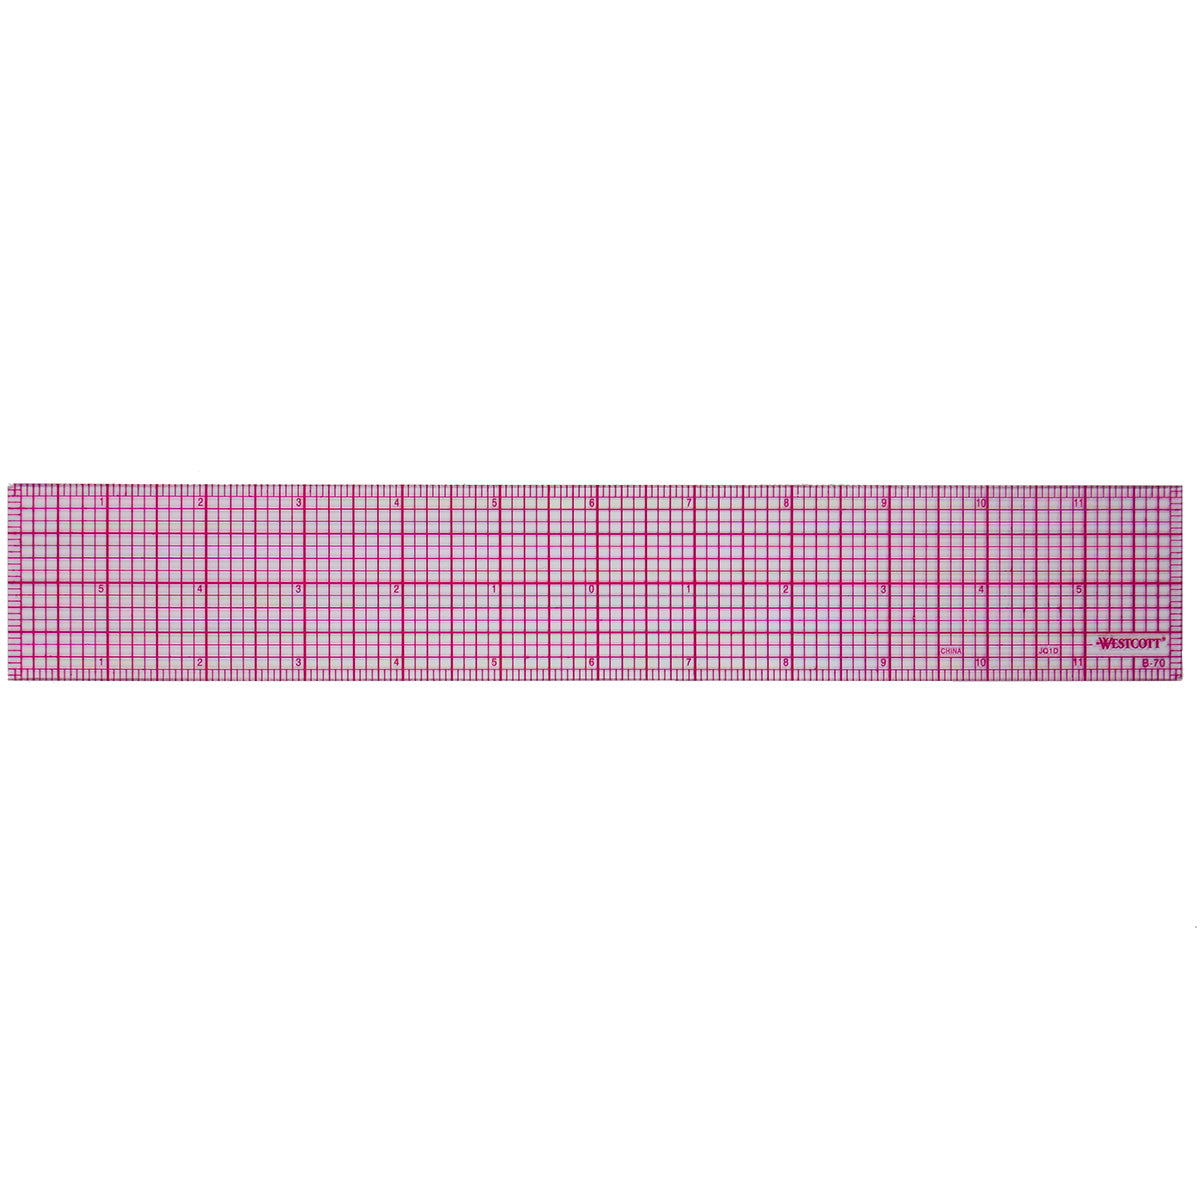 Sideways view of Westcott Beveled Ruler, 12" in length using 8ths graph. It has a transparent base with red grid overlay. It is without packaging.